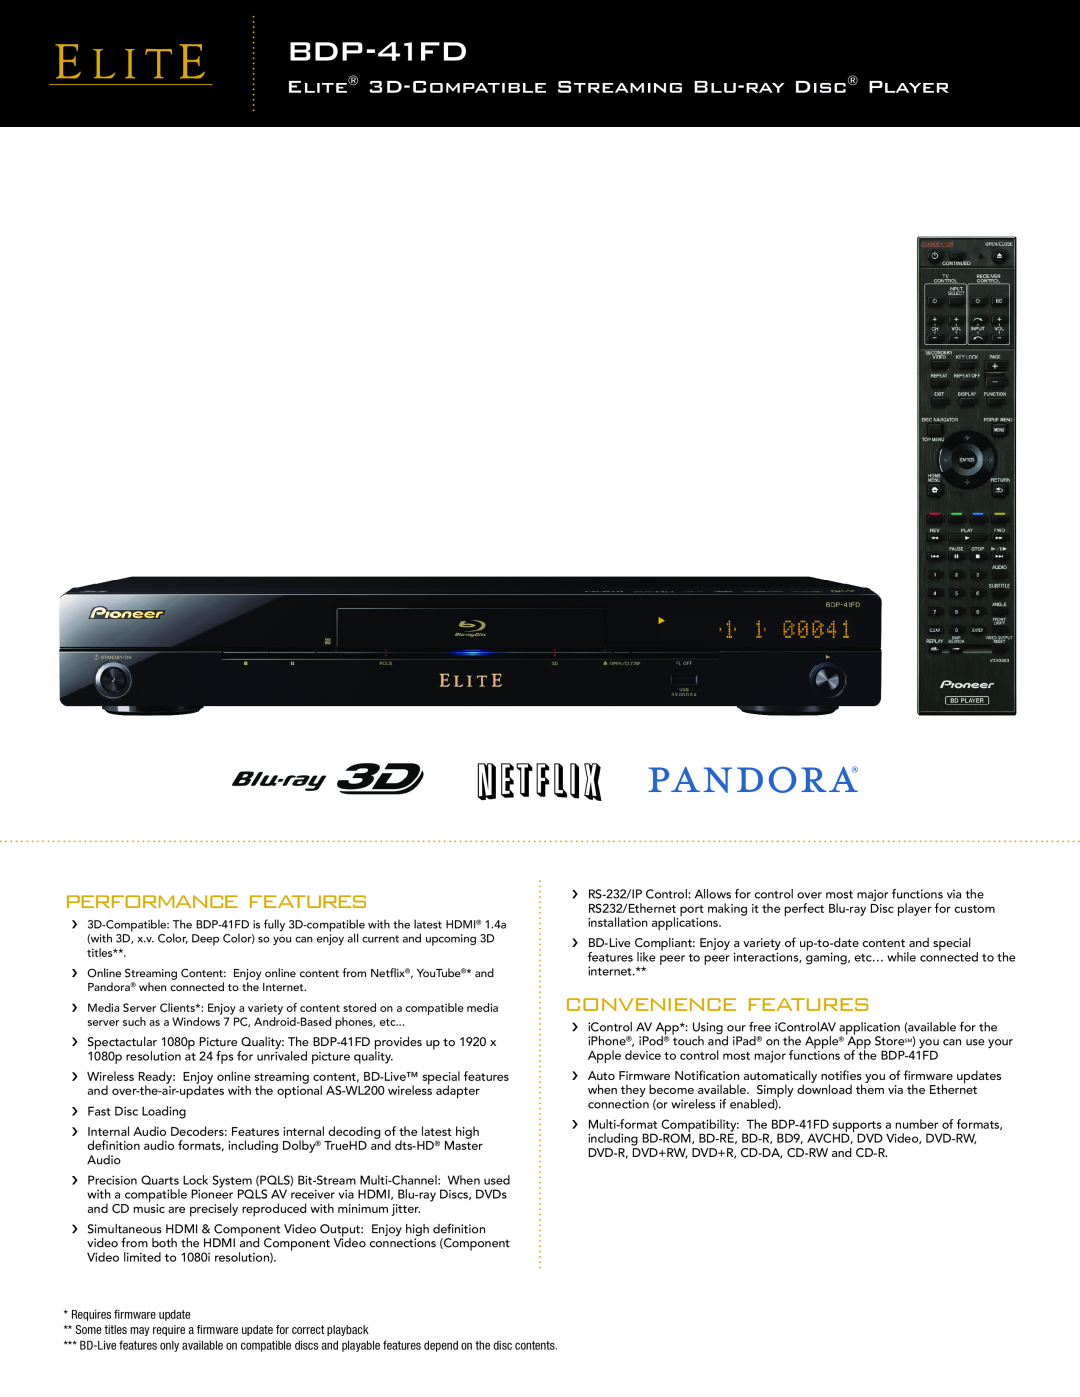 Pioneer BDP-41FD manual Performance Features, Convenience Features, ELITE 3D-COMPATIBLE STREAMING BLU-RAY DISC PLAYER 